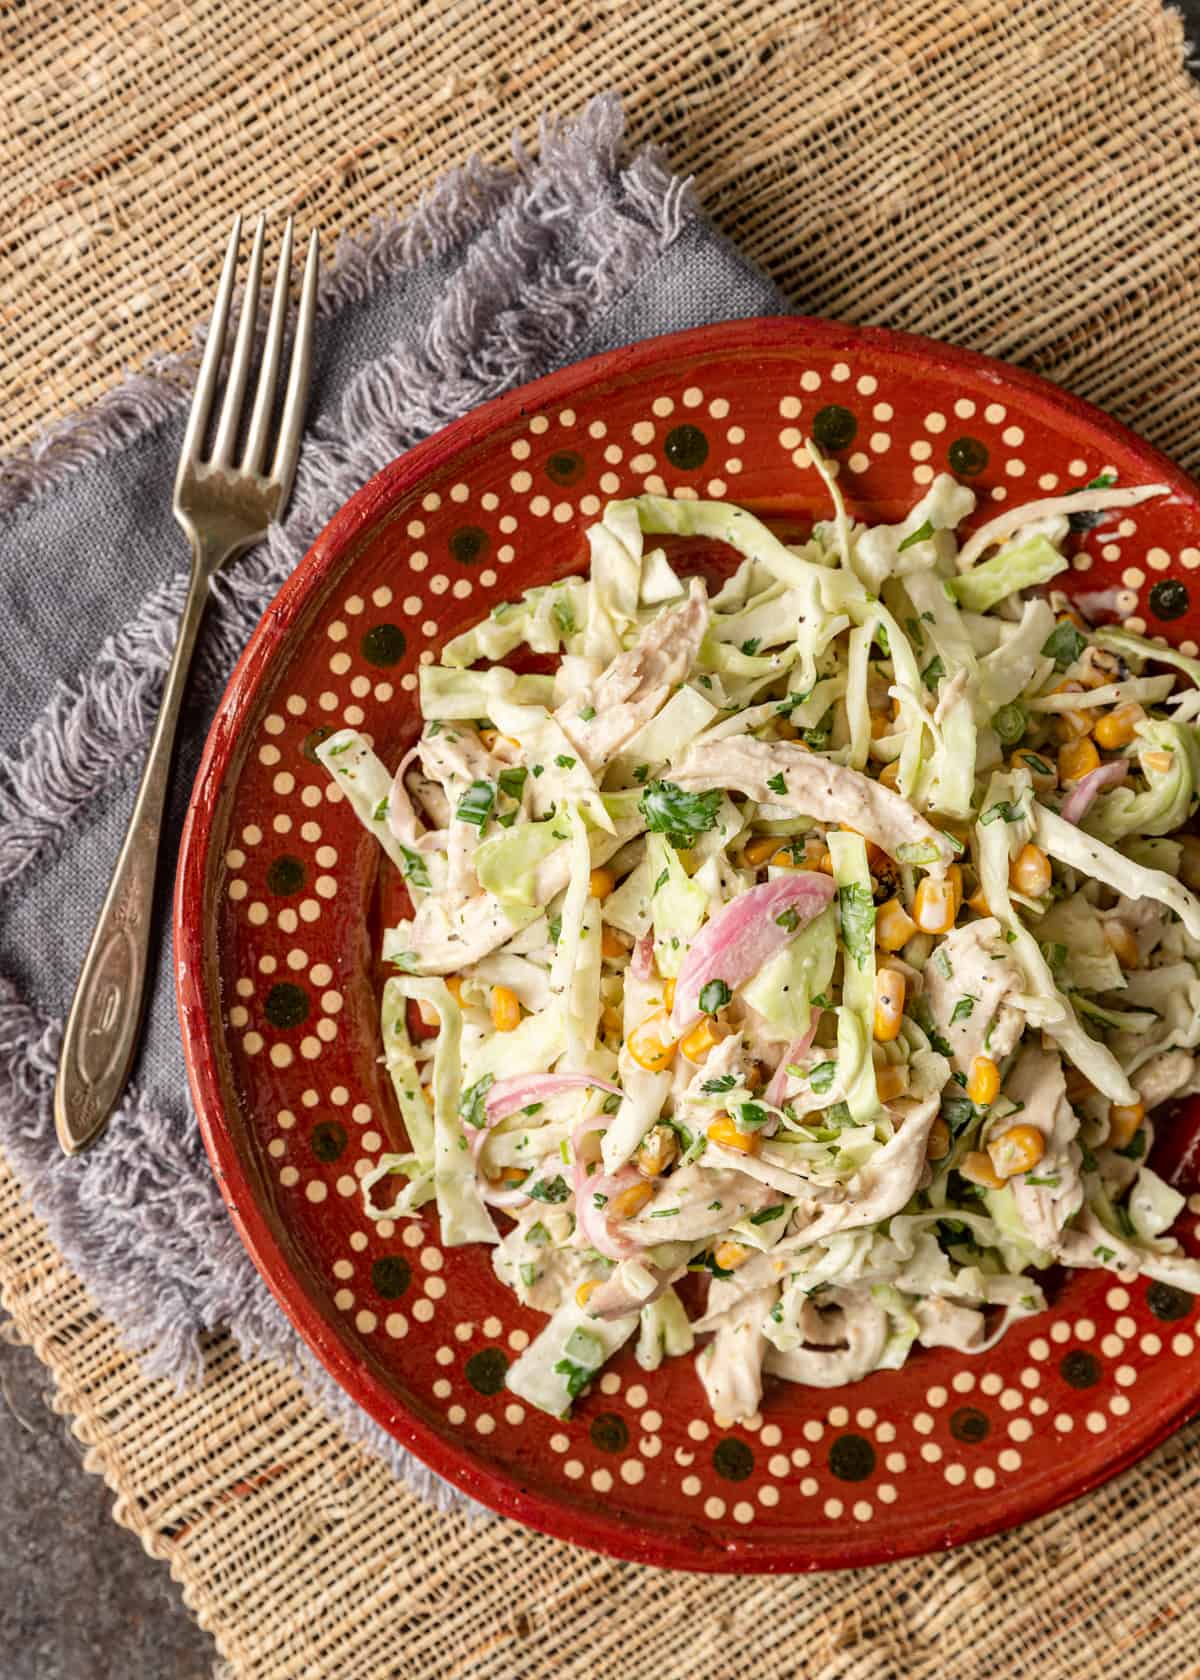 overhead: a red ceramic plate with Mexican coleslaw and a fork